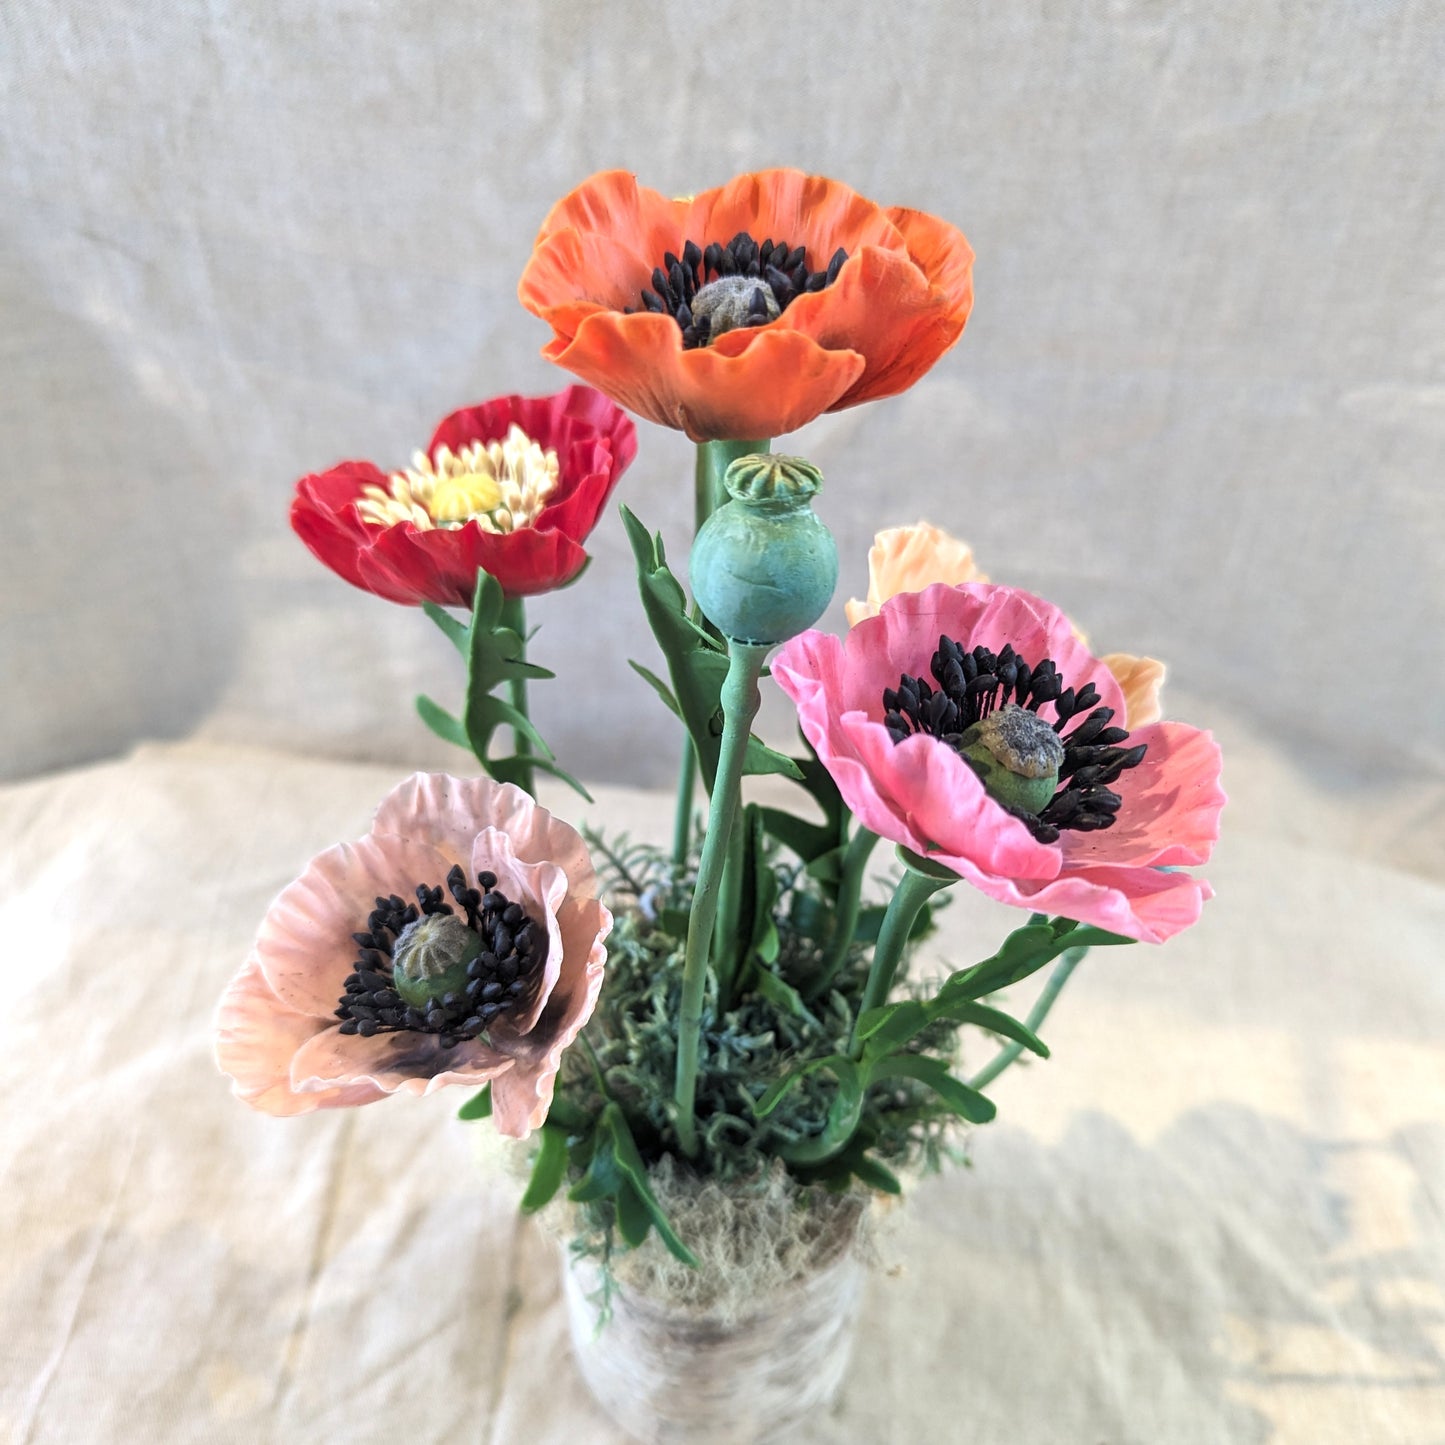 Chaba's Clay Flowers - Poppies